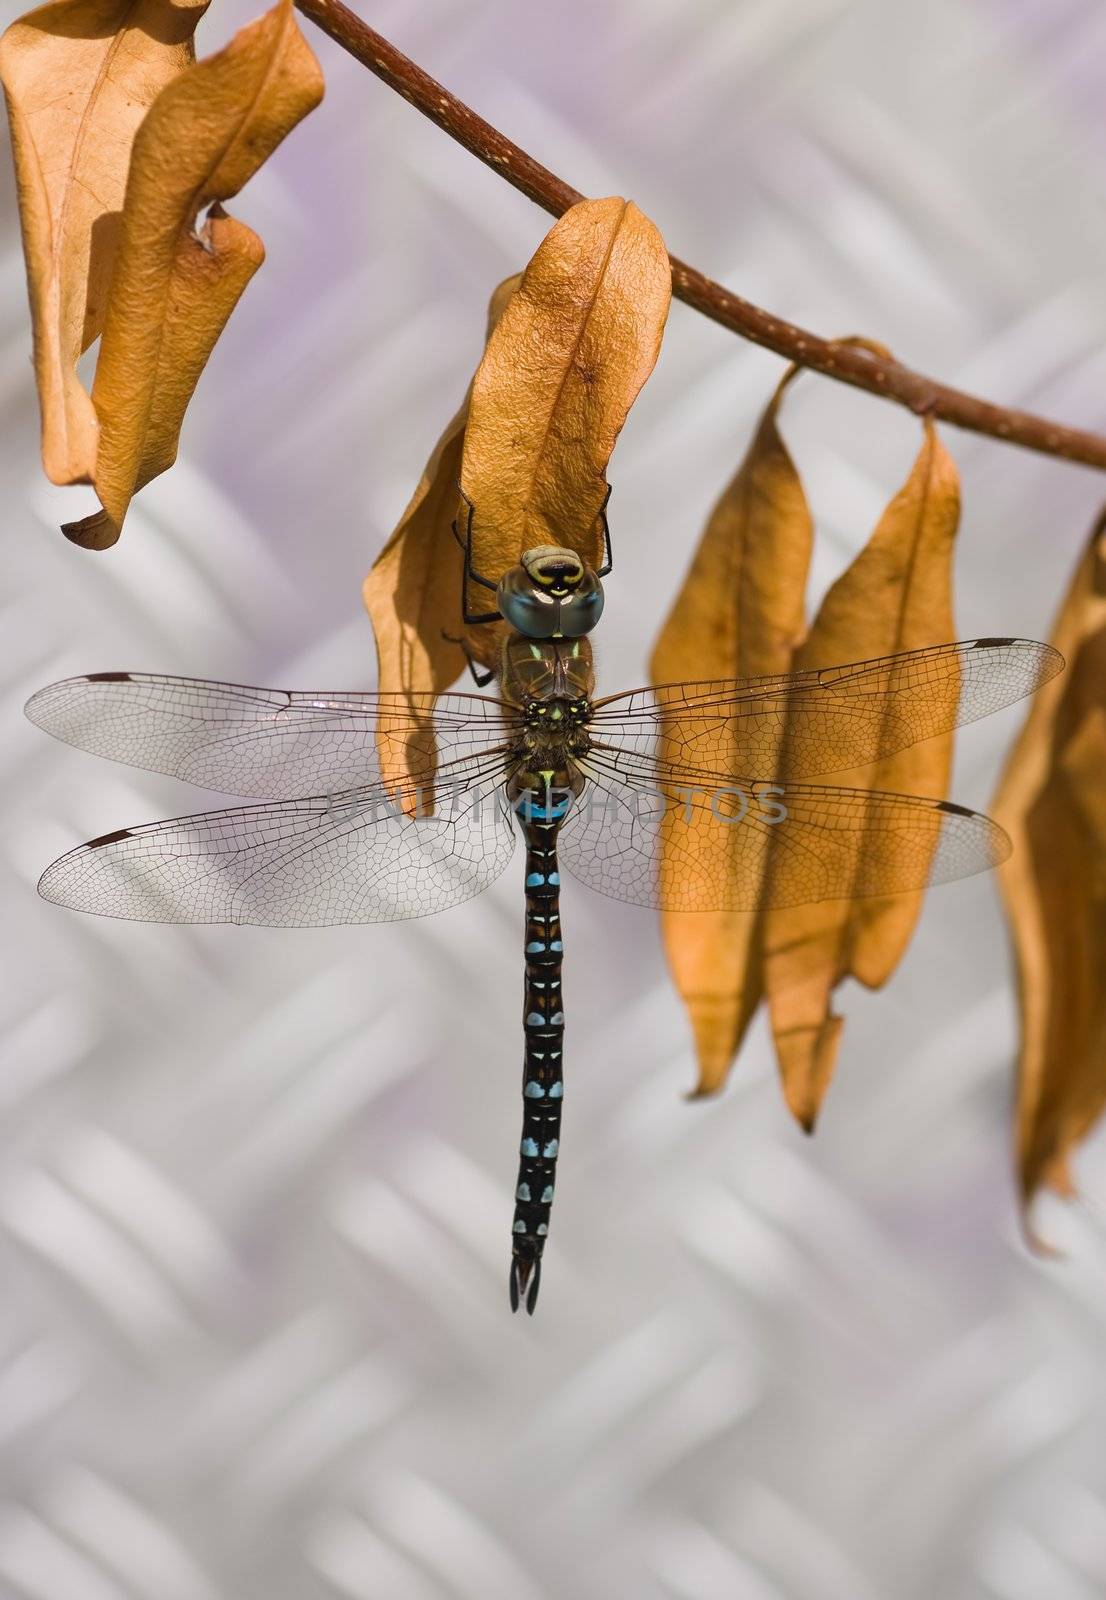 Migrant Hawker is one of the smaller species of hawker dragonflies